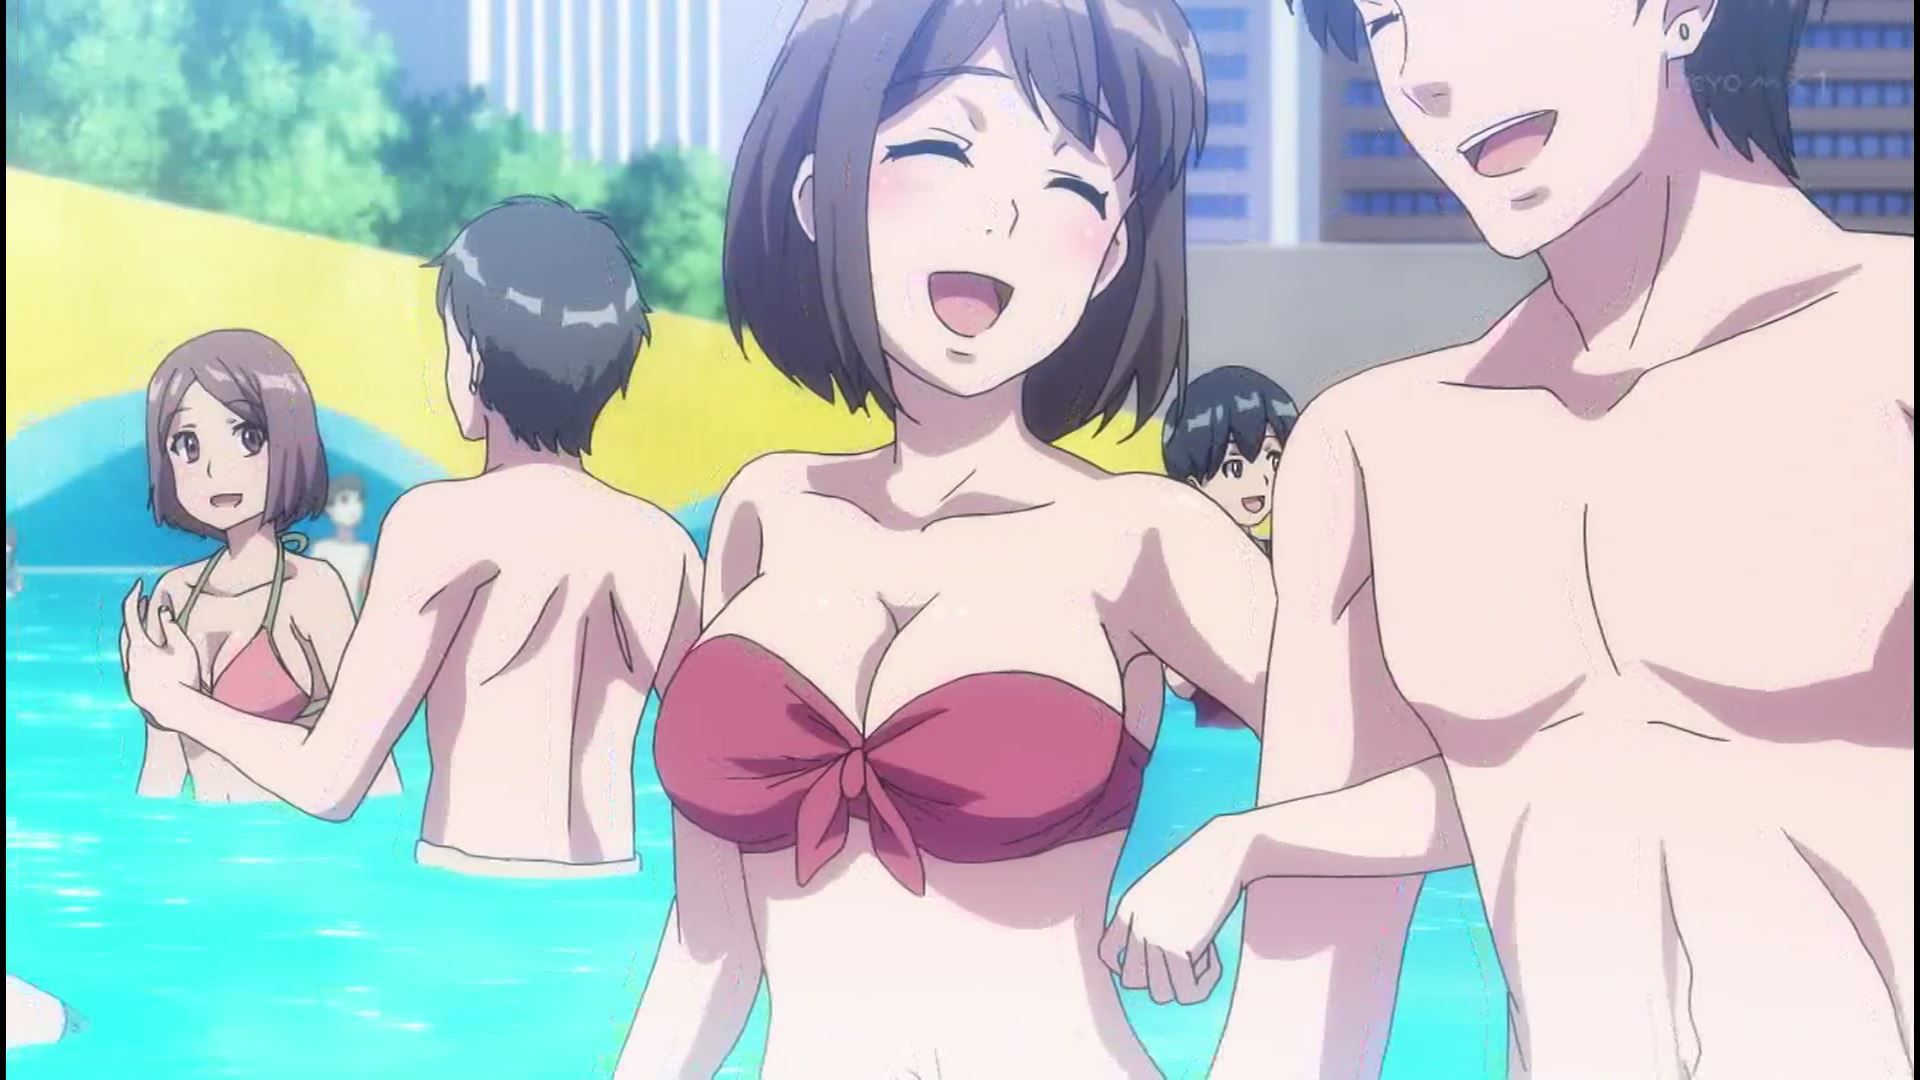 Anime [Kandagawa JETGIRLS] 6 episodes, such as girls' very cute swimsuit and naked! 11